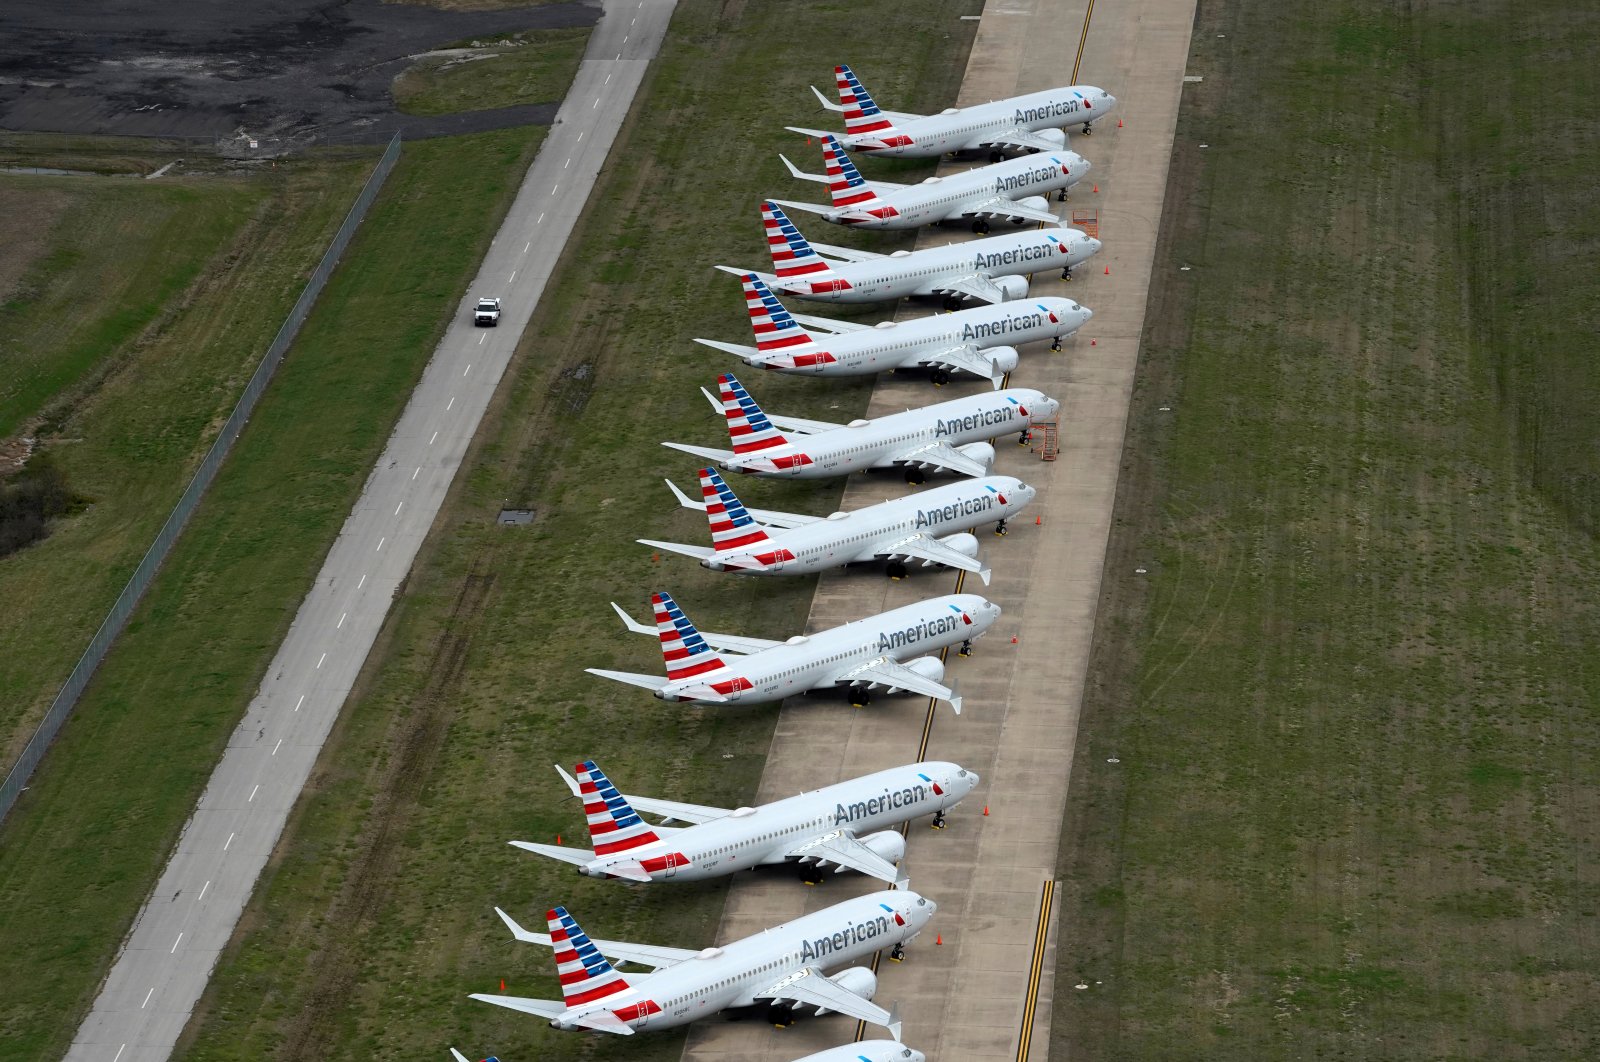 American Airlines 737 MAX passenger planes are parked on the tarmac at Tulsa International Airport in Tulsa, Oklahoma, U.S., March 23, 2020. (Reuters Photo)